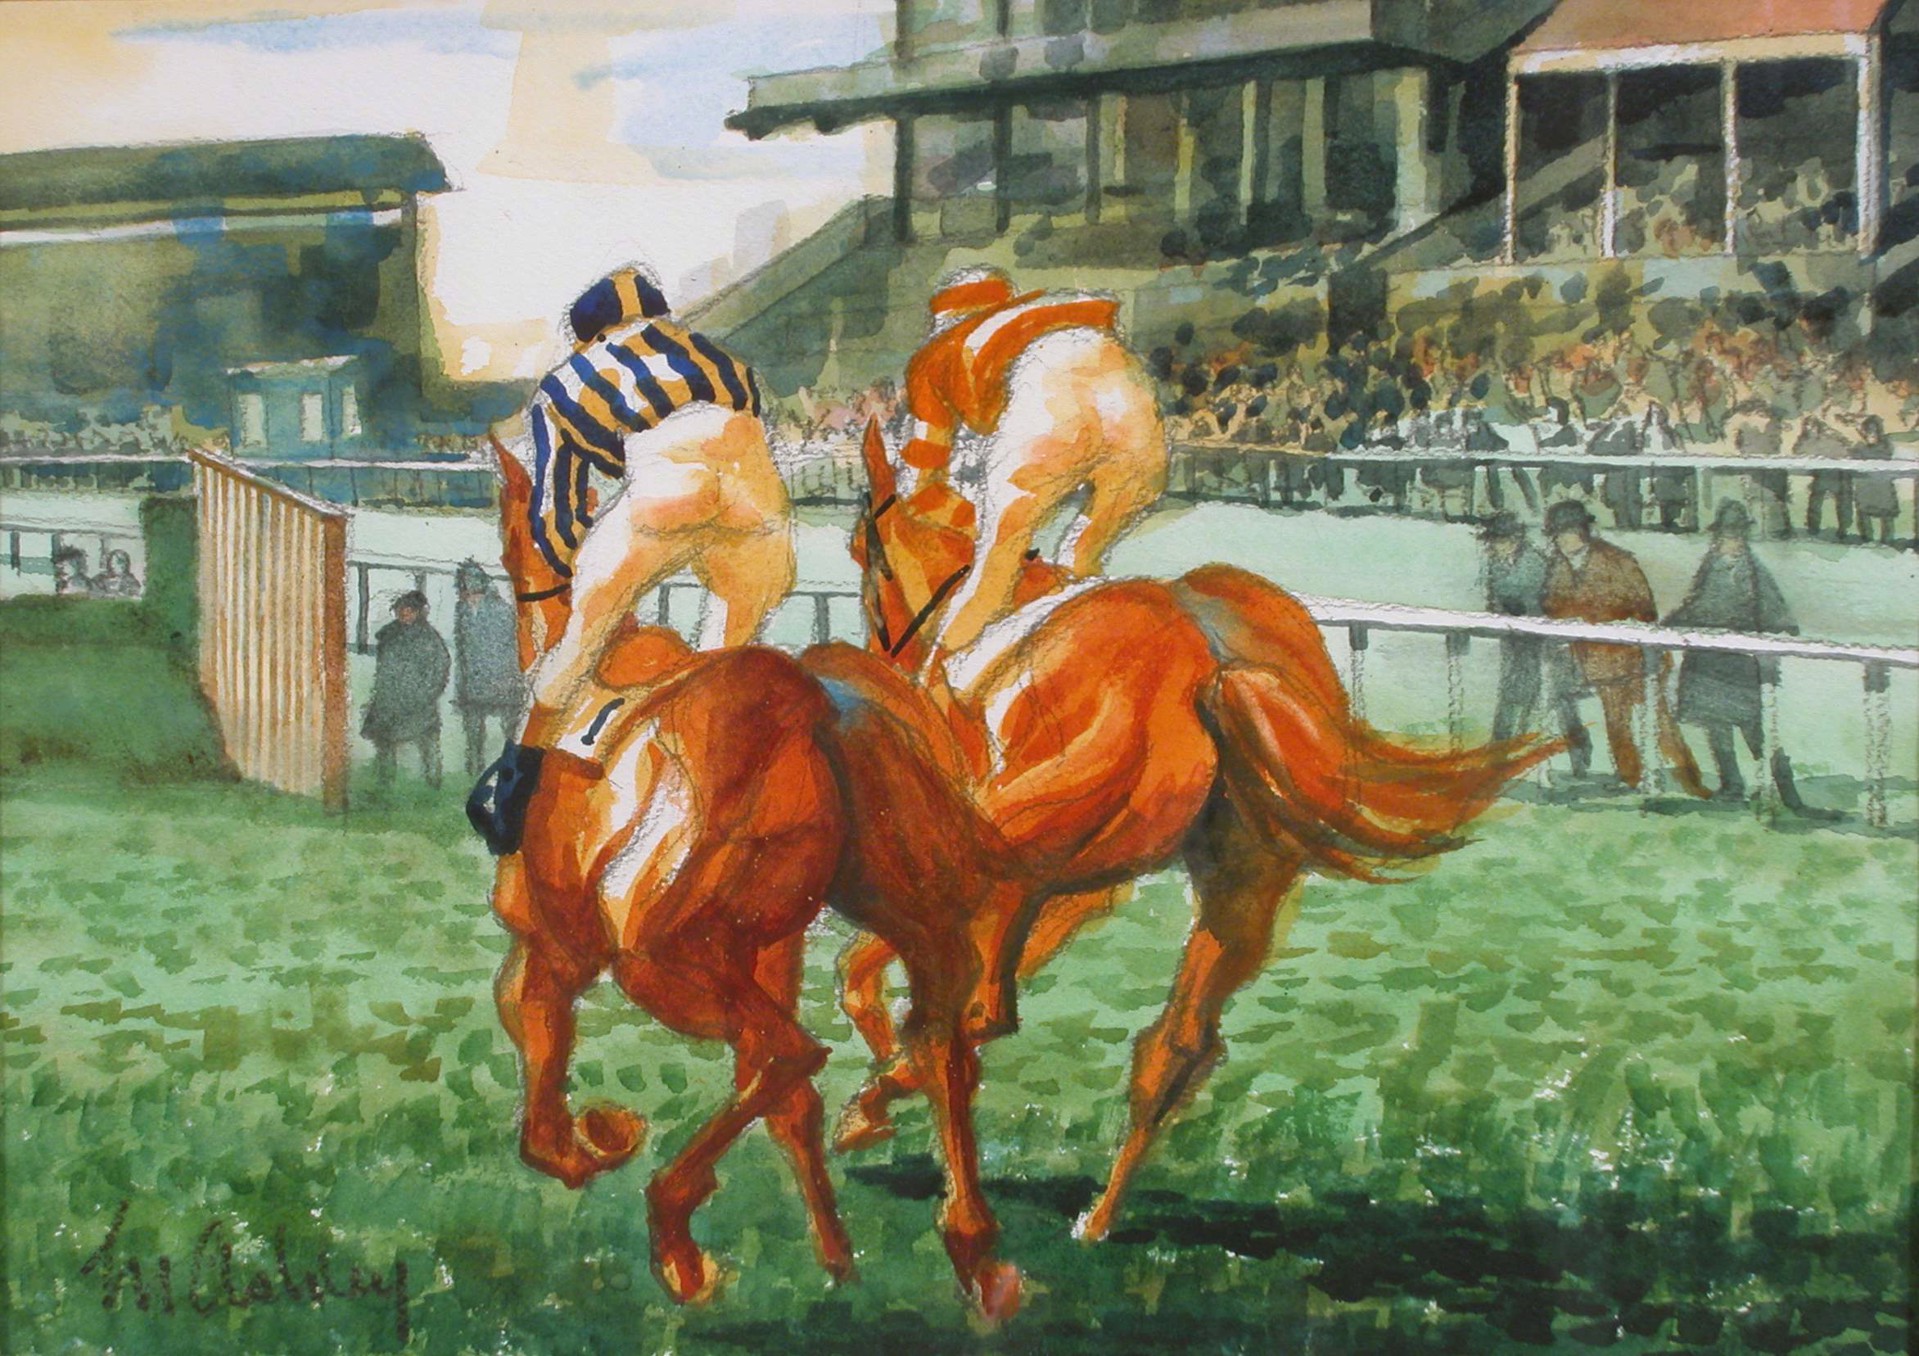 Cheltenham: Two Horses at the Last Fence (A61) by Frank N. Ashley